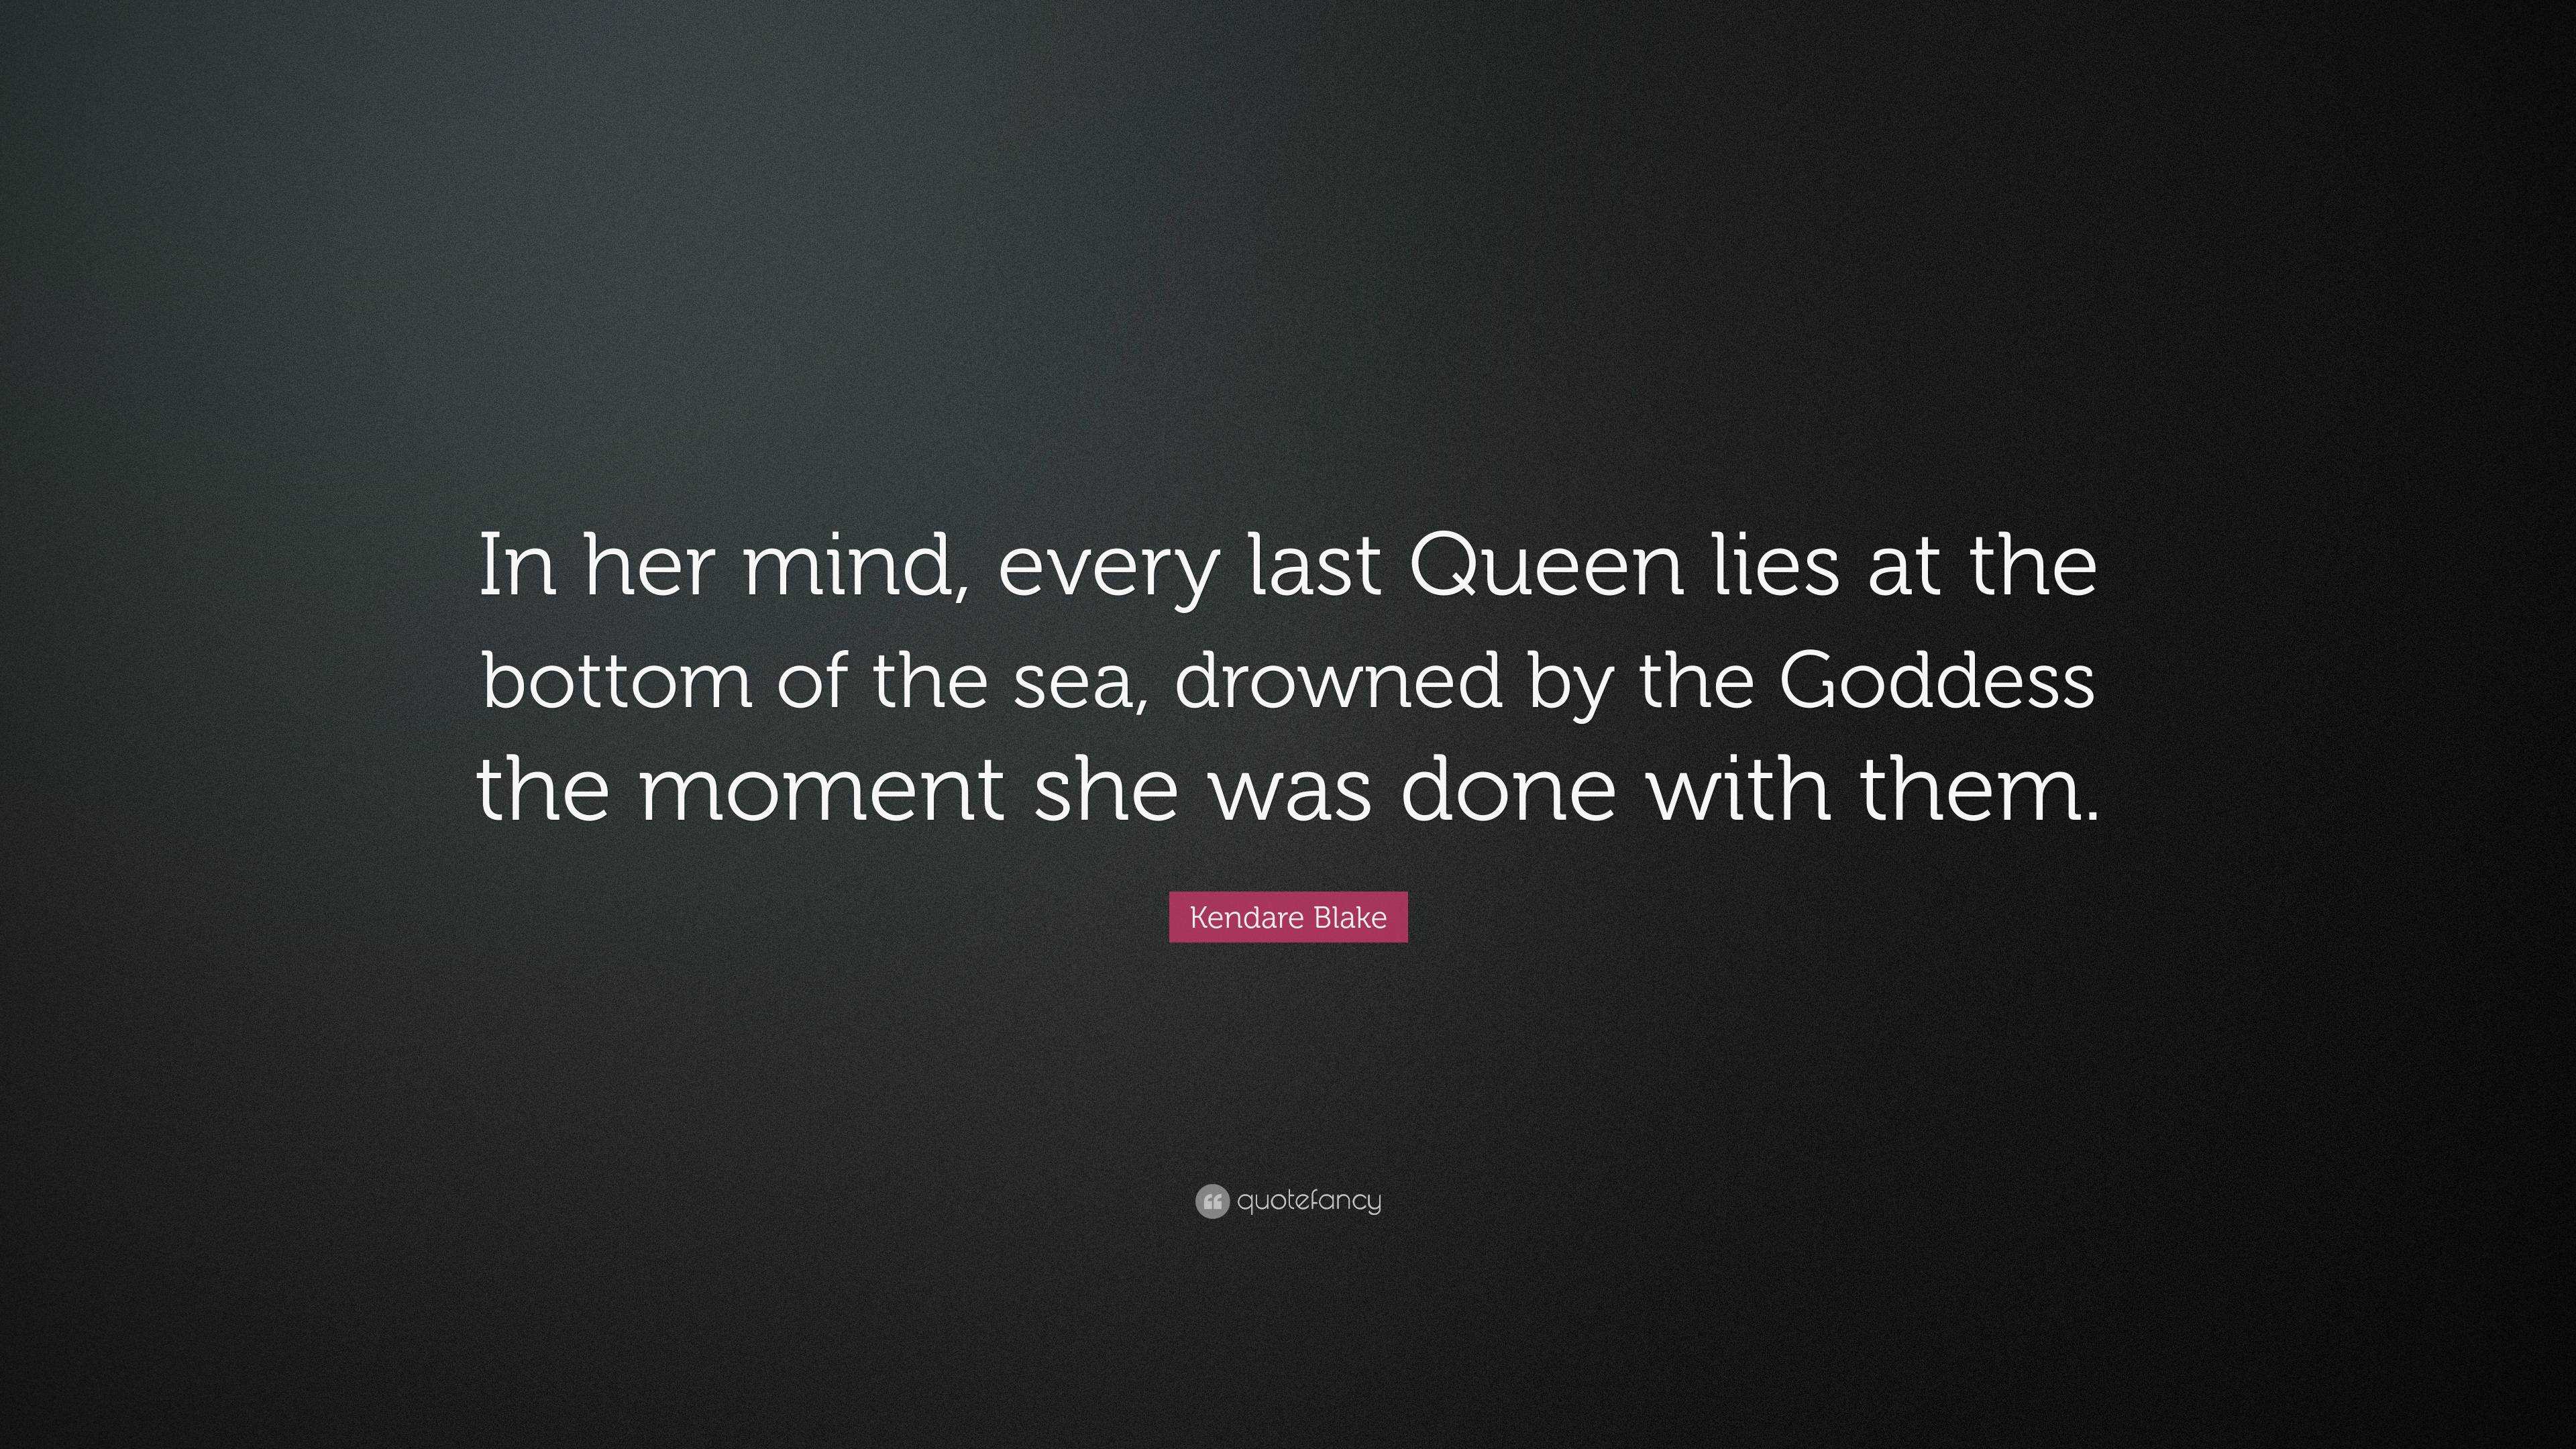 Kendare Blake Quote: “In her mind, every last Queen lies at the bottom ...